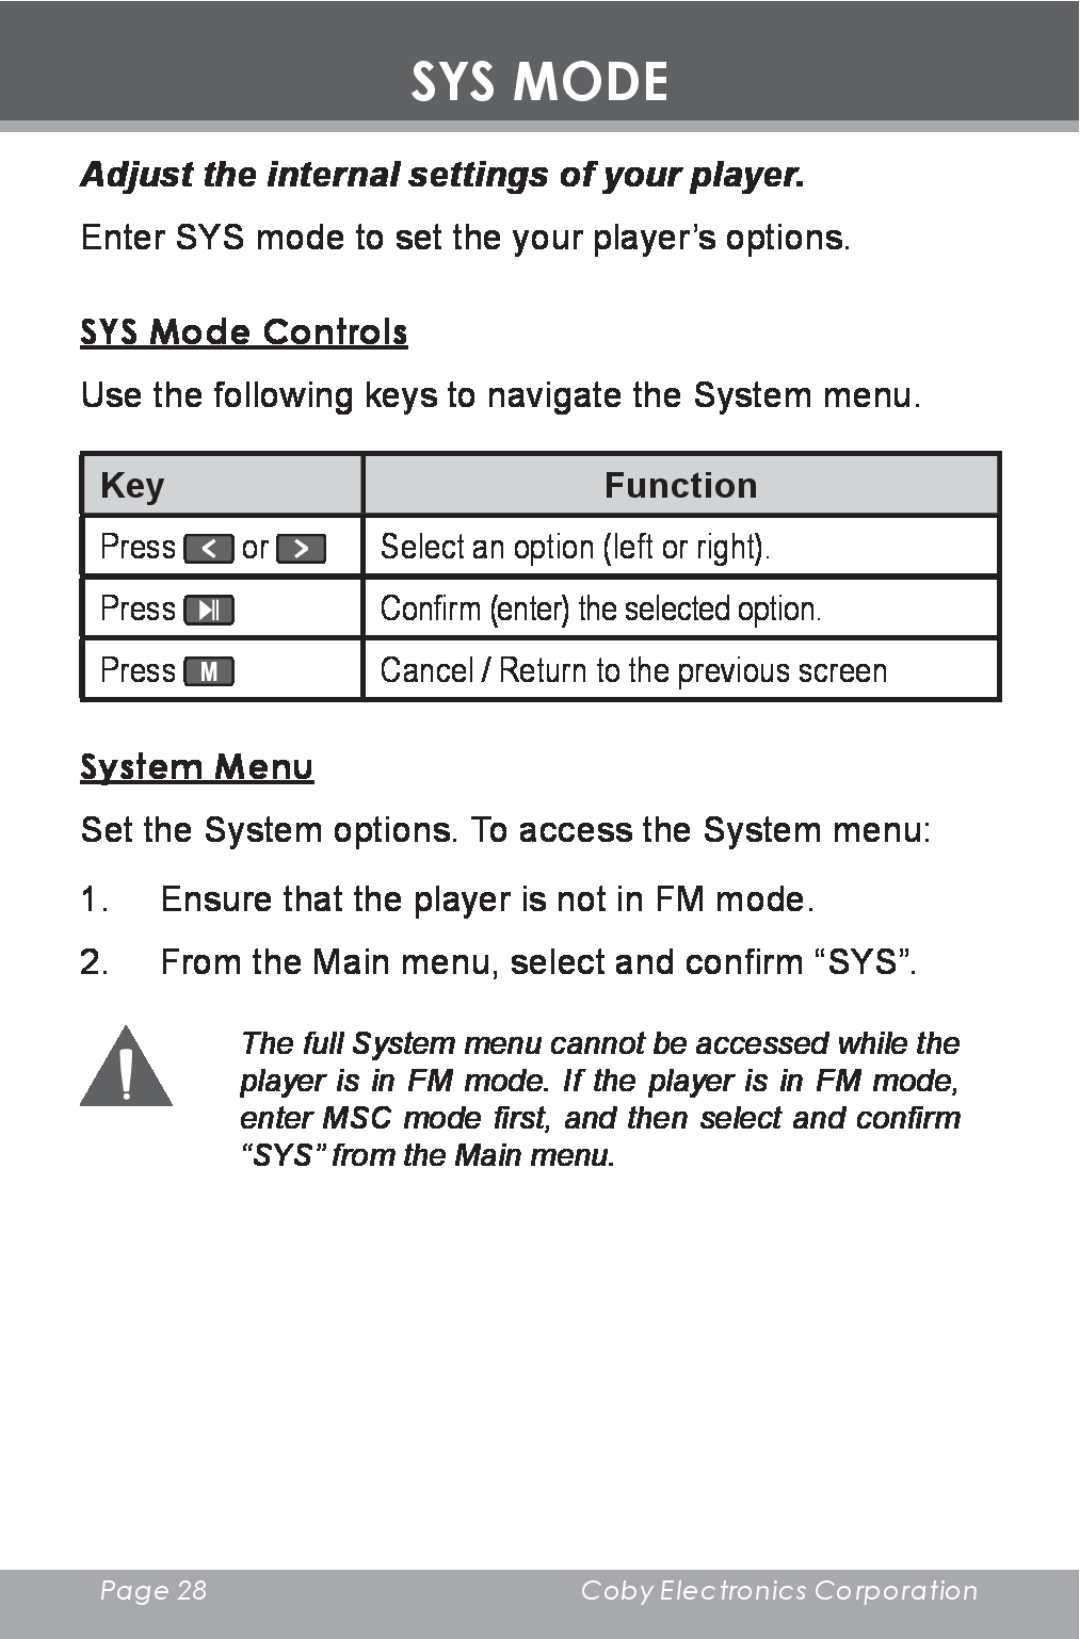 COBY electronic MP-C643 Sys Mode, Adjust the internal settings of your player, SYS Mode Controls, System Menu, Function 